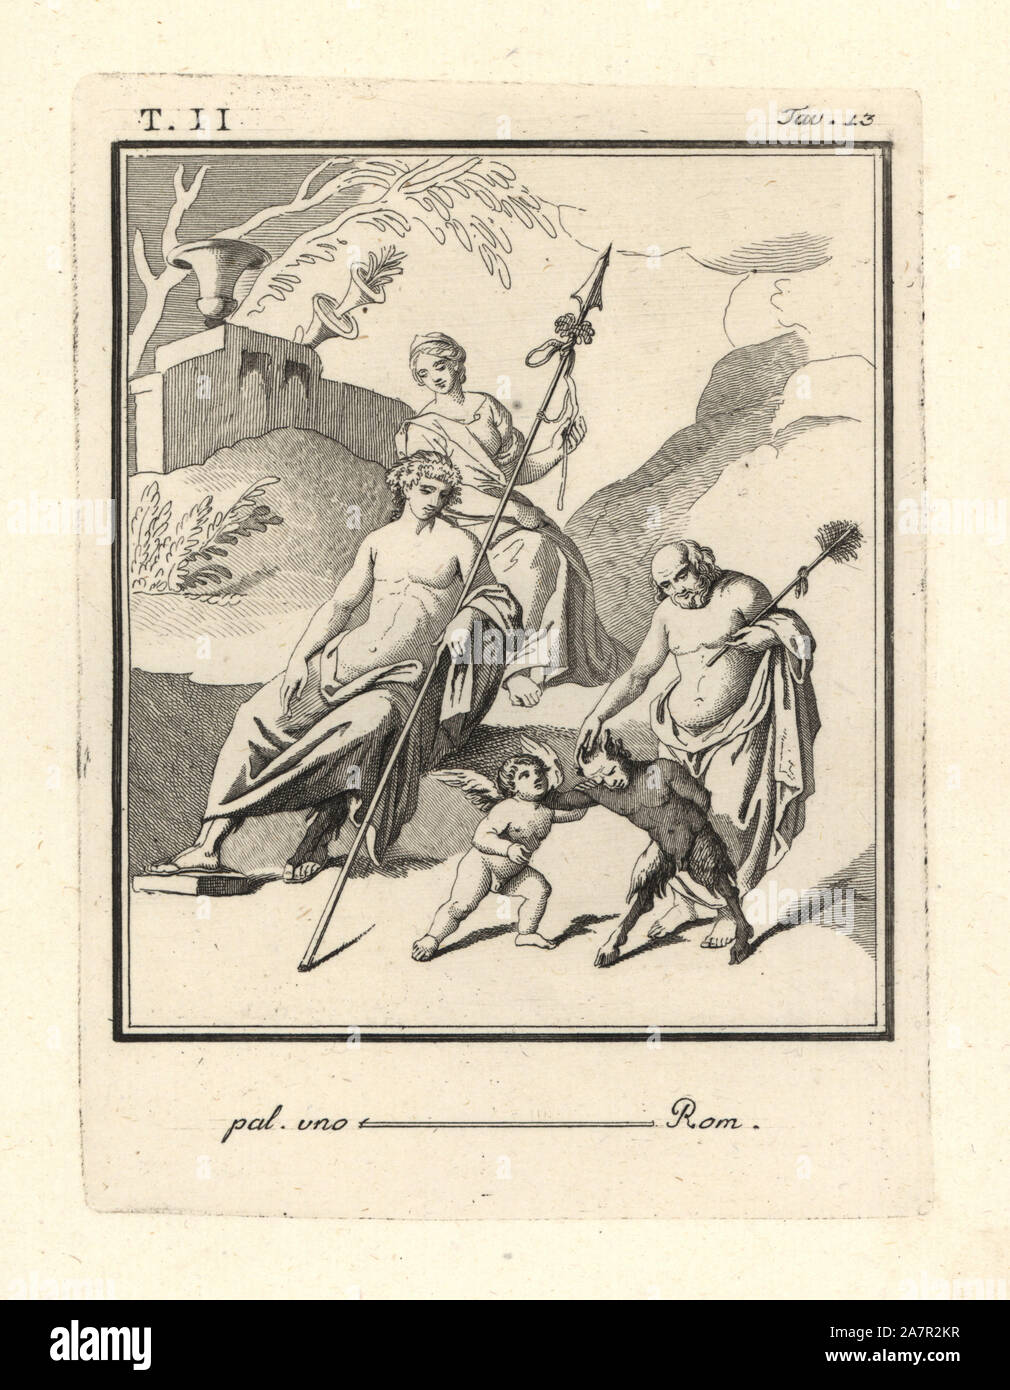 Bacchus in crown of vine leaves watching a fight between Cupid and a satyr. Silenus has his right hand on the head of a satyr. Copperplate engraving by Tommaso Piroli from his Antiquities of Herculaneum (Antichita di Ercolano), Rome, 1789. Stock Photo